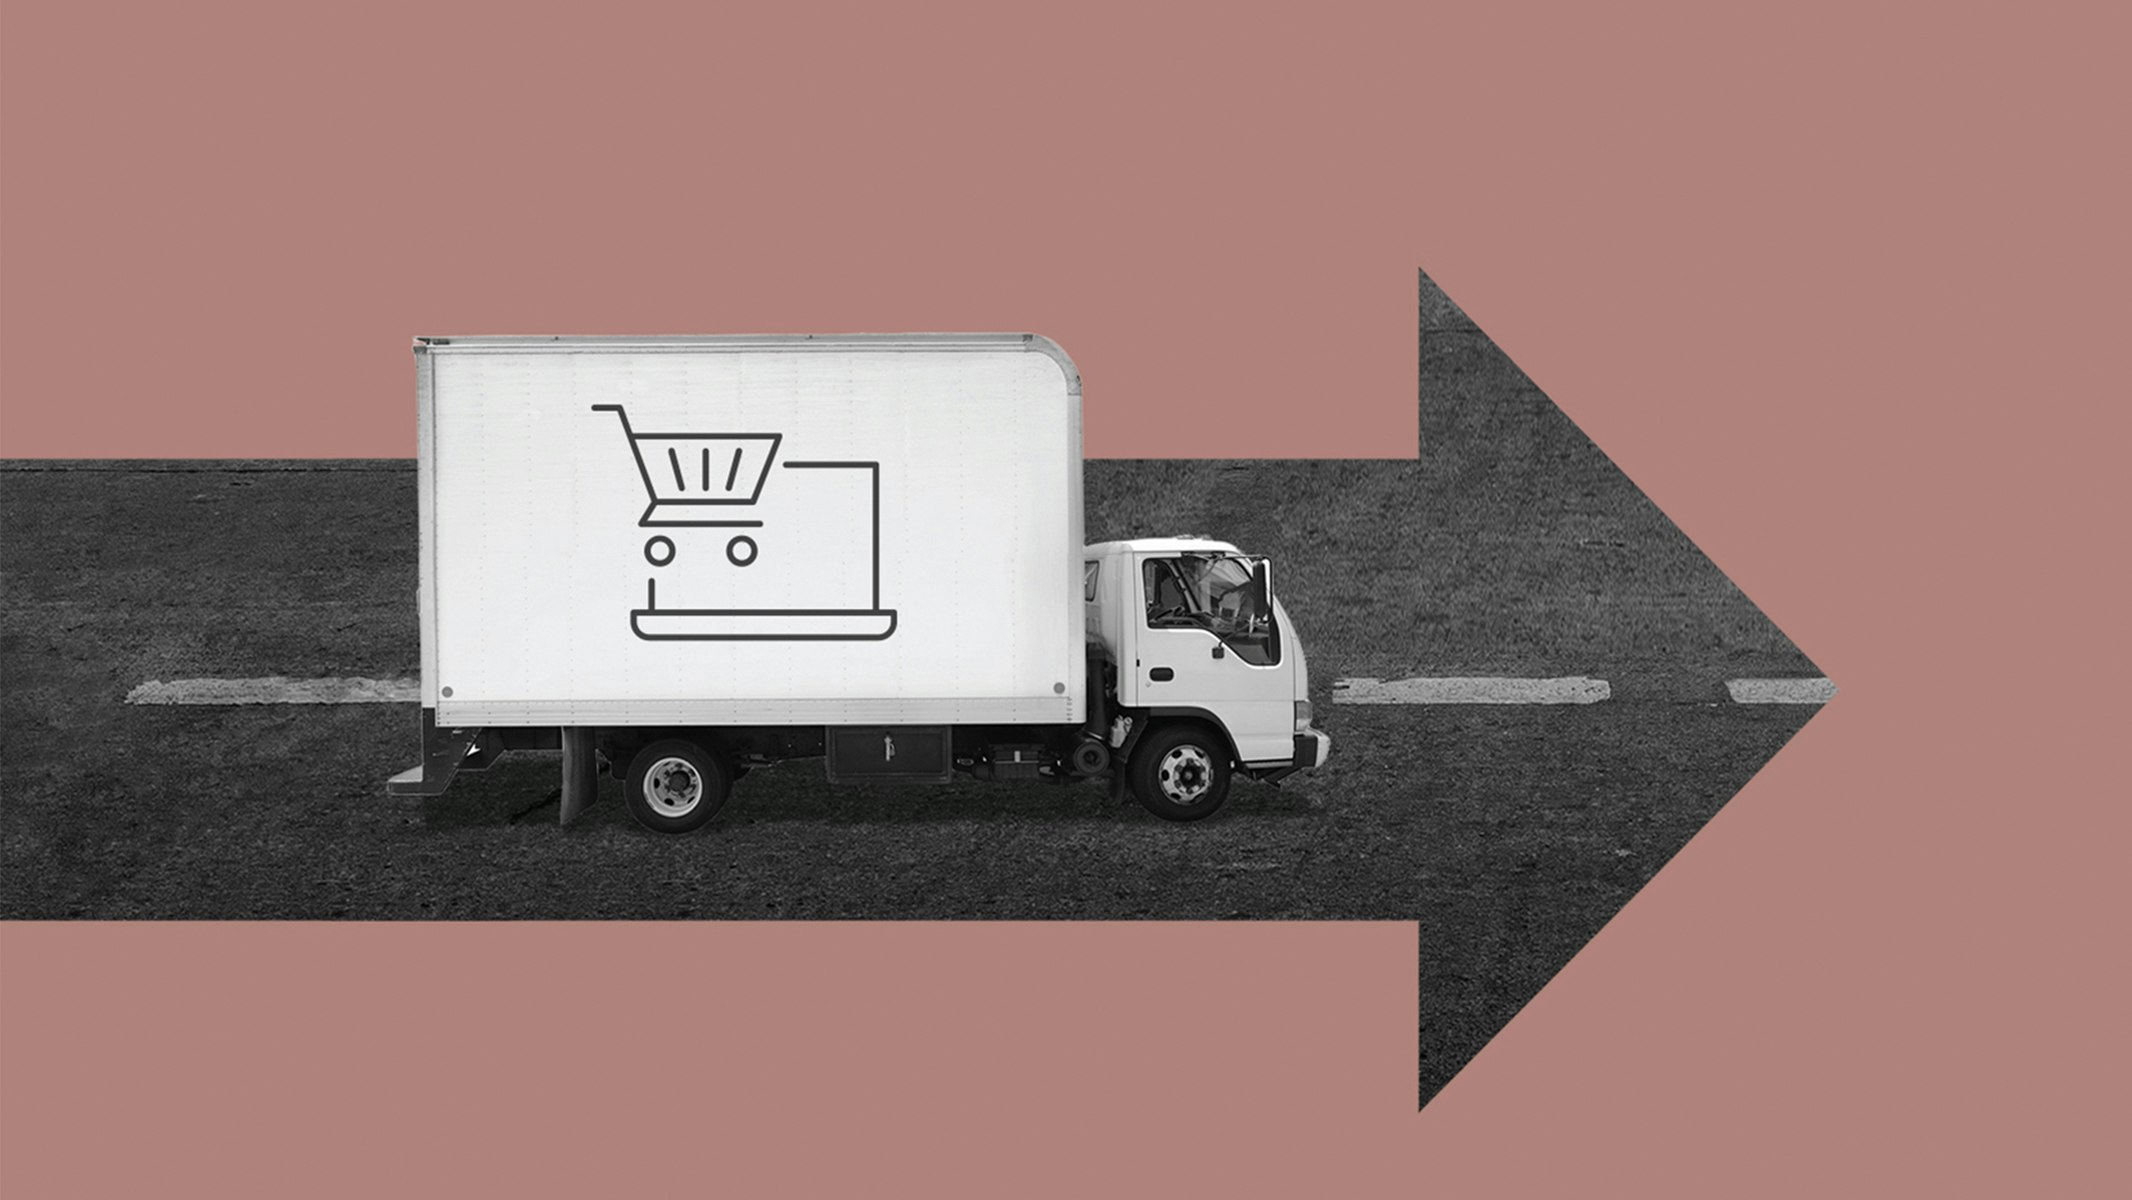 Illustration of e-commerce delivery truck on road moving with an arrow